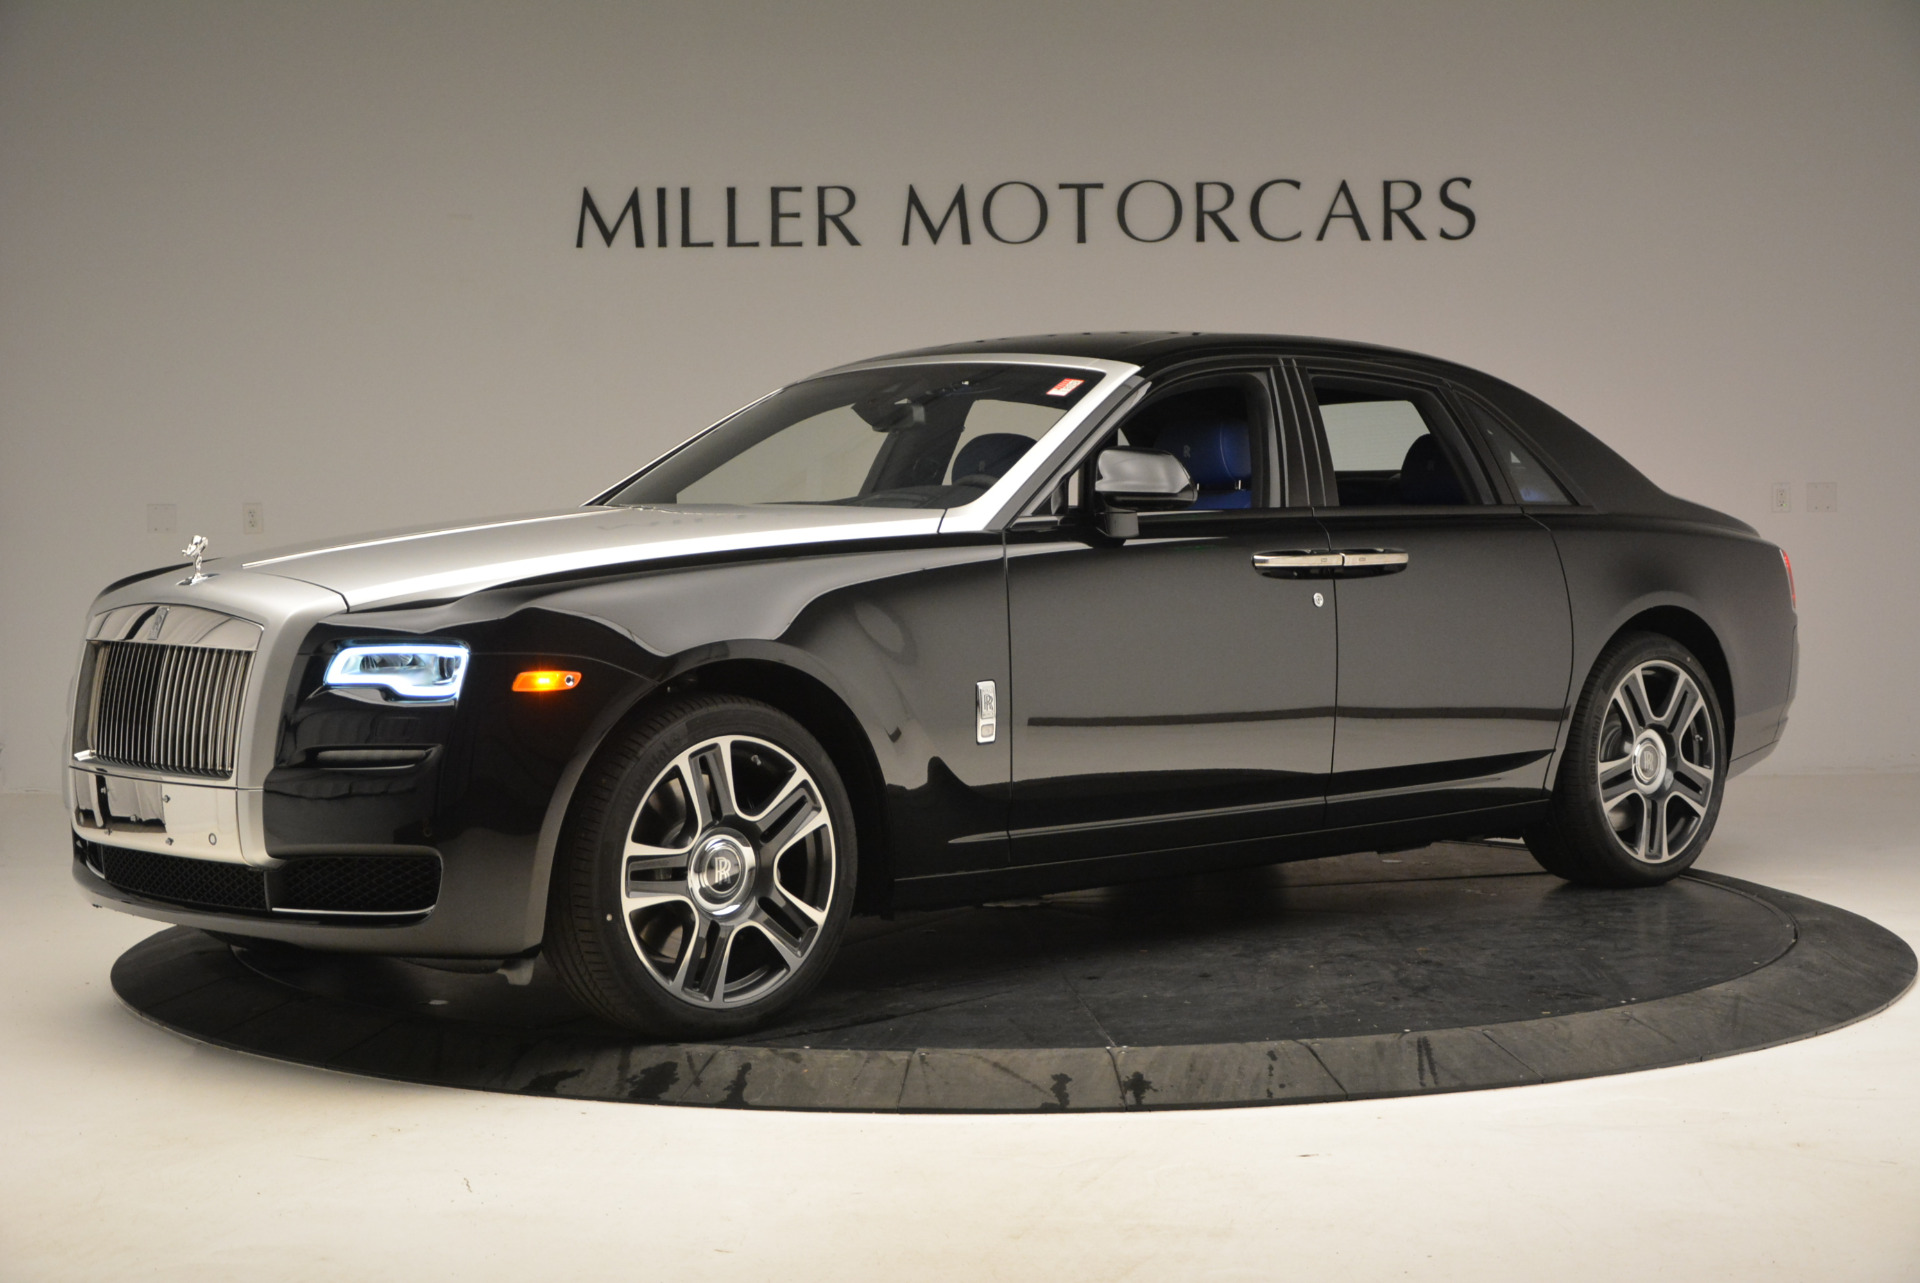 Rare 2017 RollsRoyce Ghost Black Badge Is a 400000 Apparition